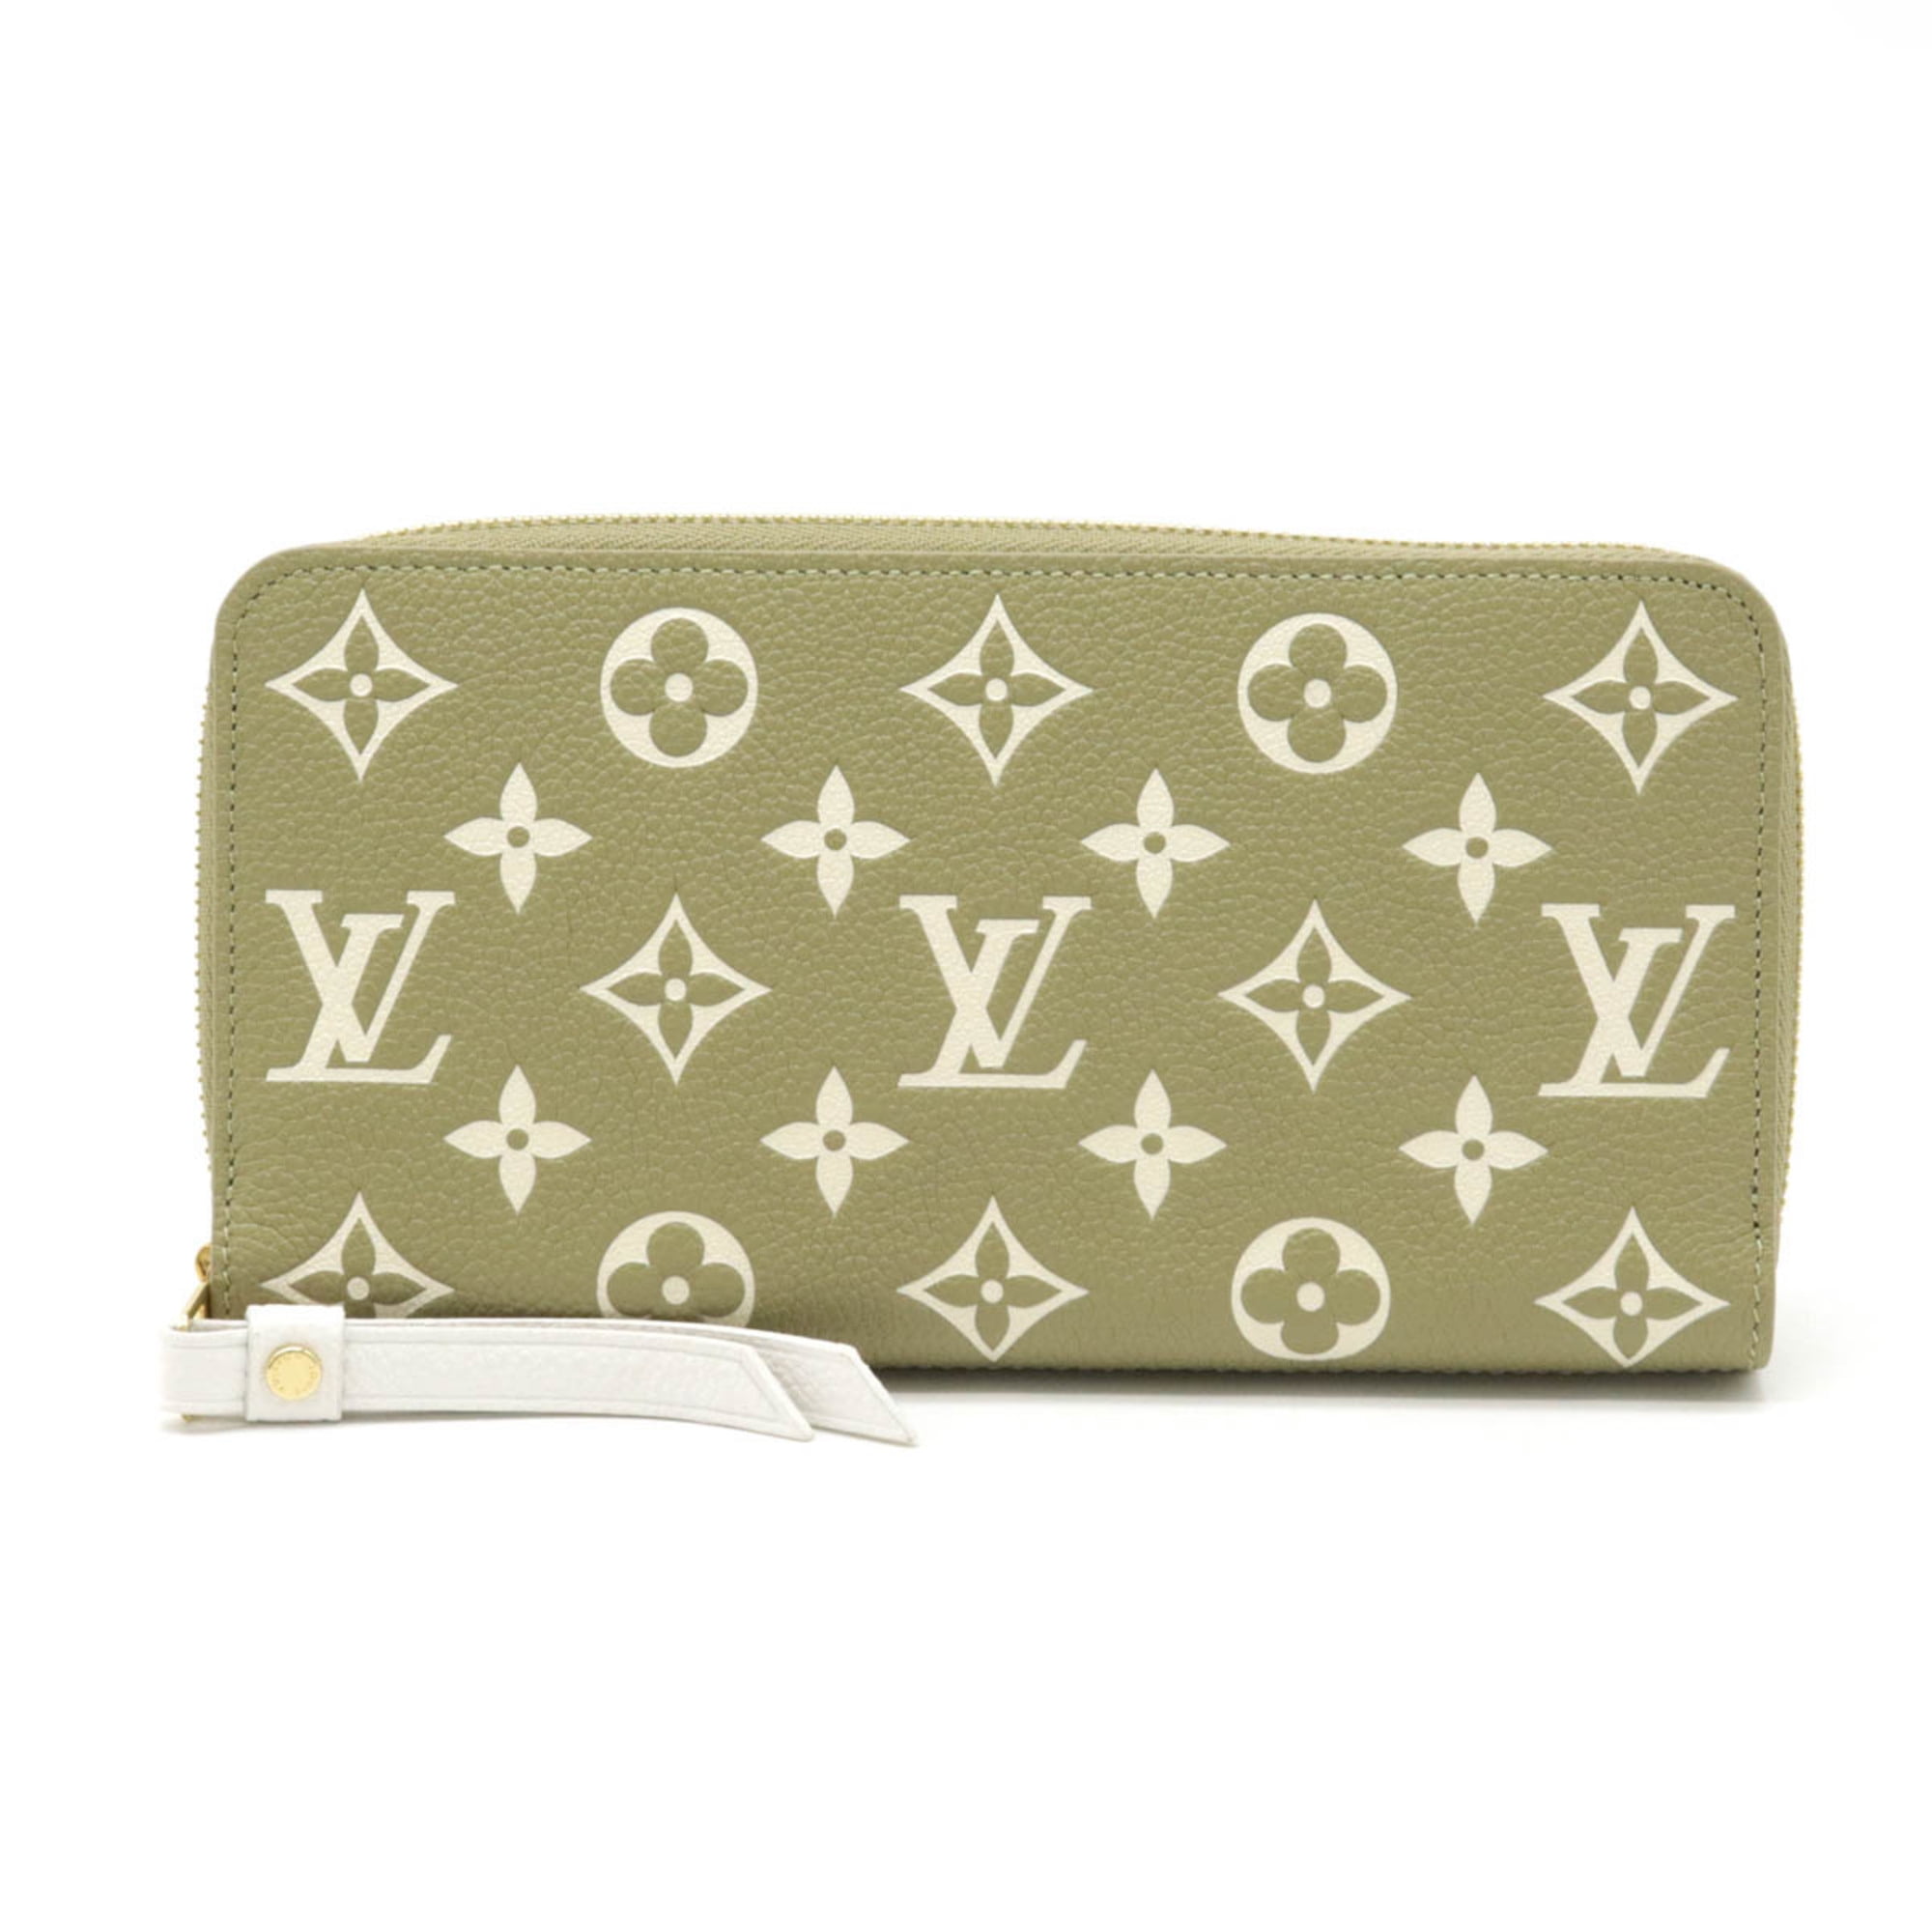 LV prism id holder clear card holder - Xpurse